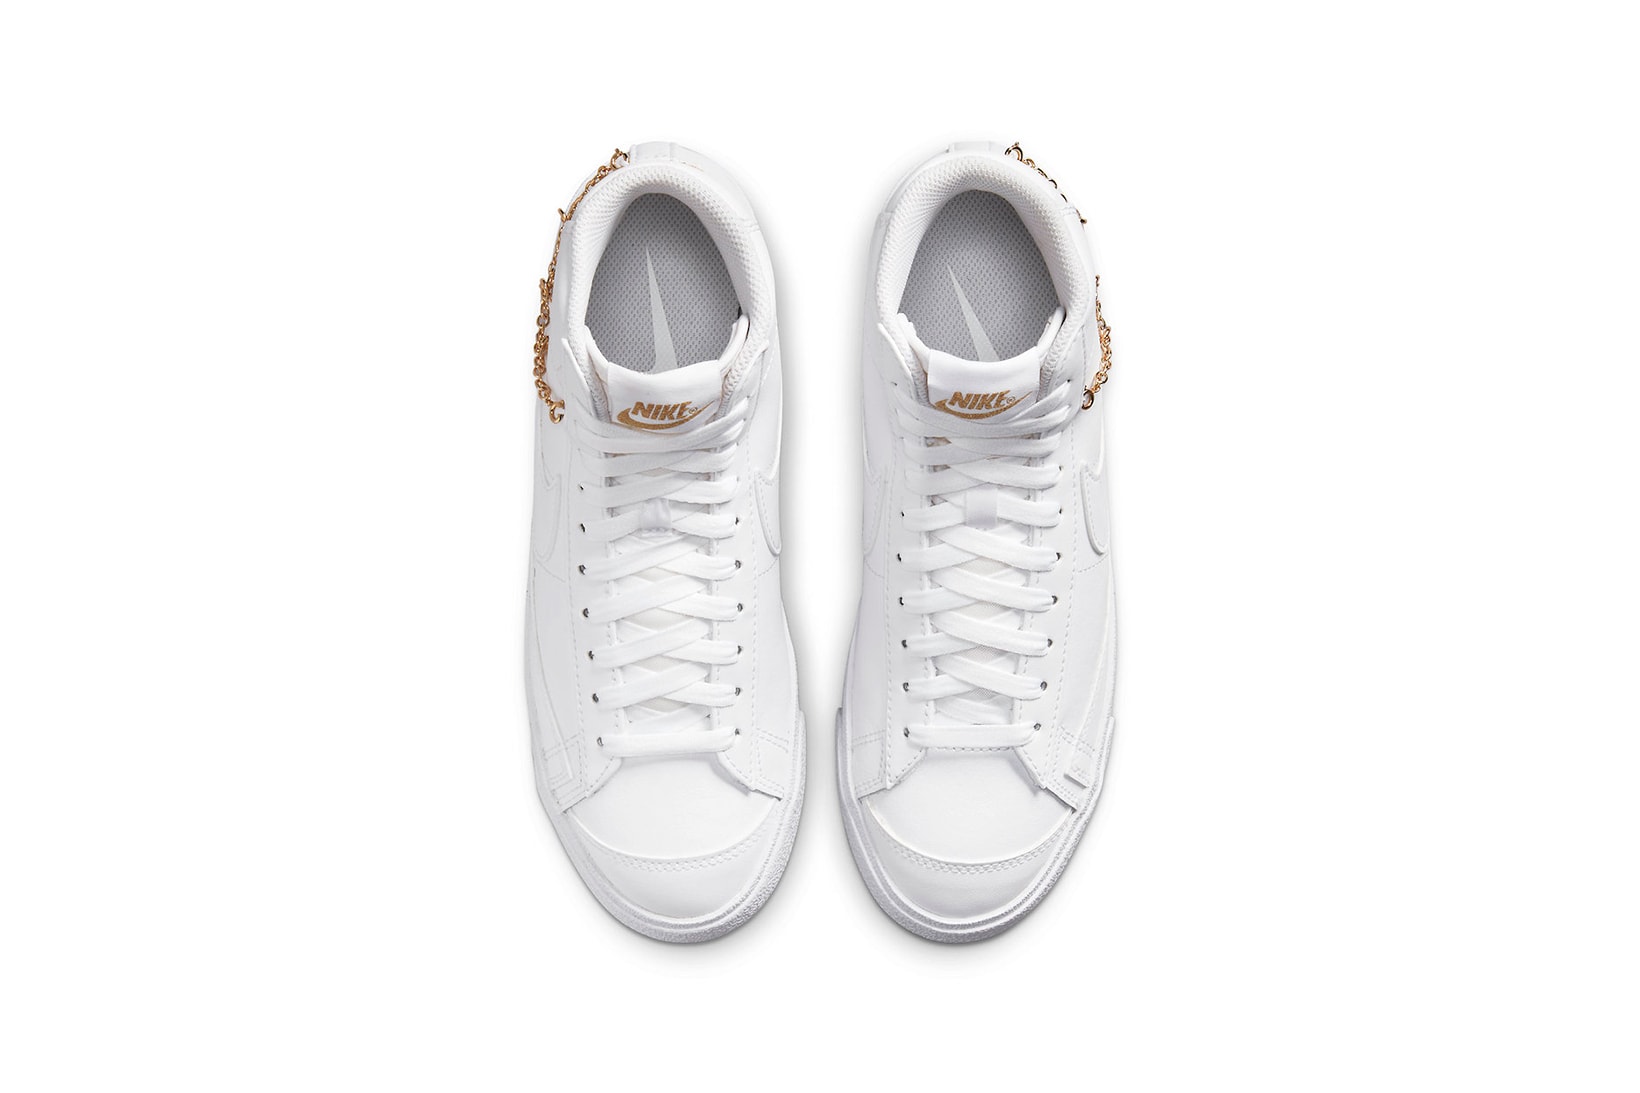 Nike Blazer Mid Lucky Charms White Metallic Gold Sneakers Footwear Shoes Kicks Aerial Top View Insoles